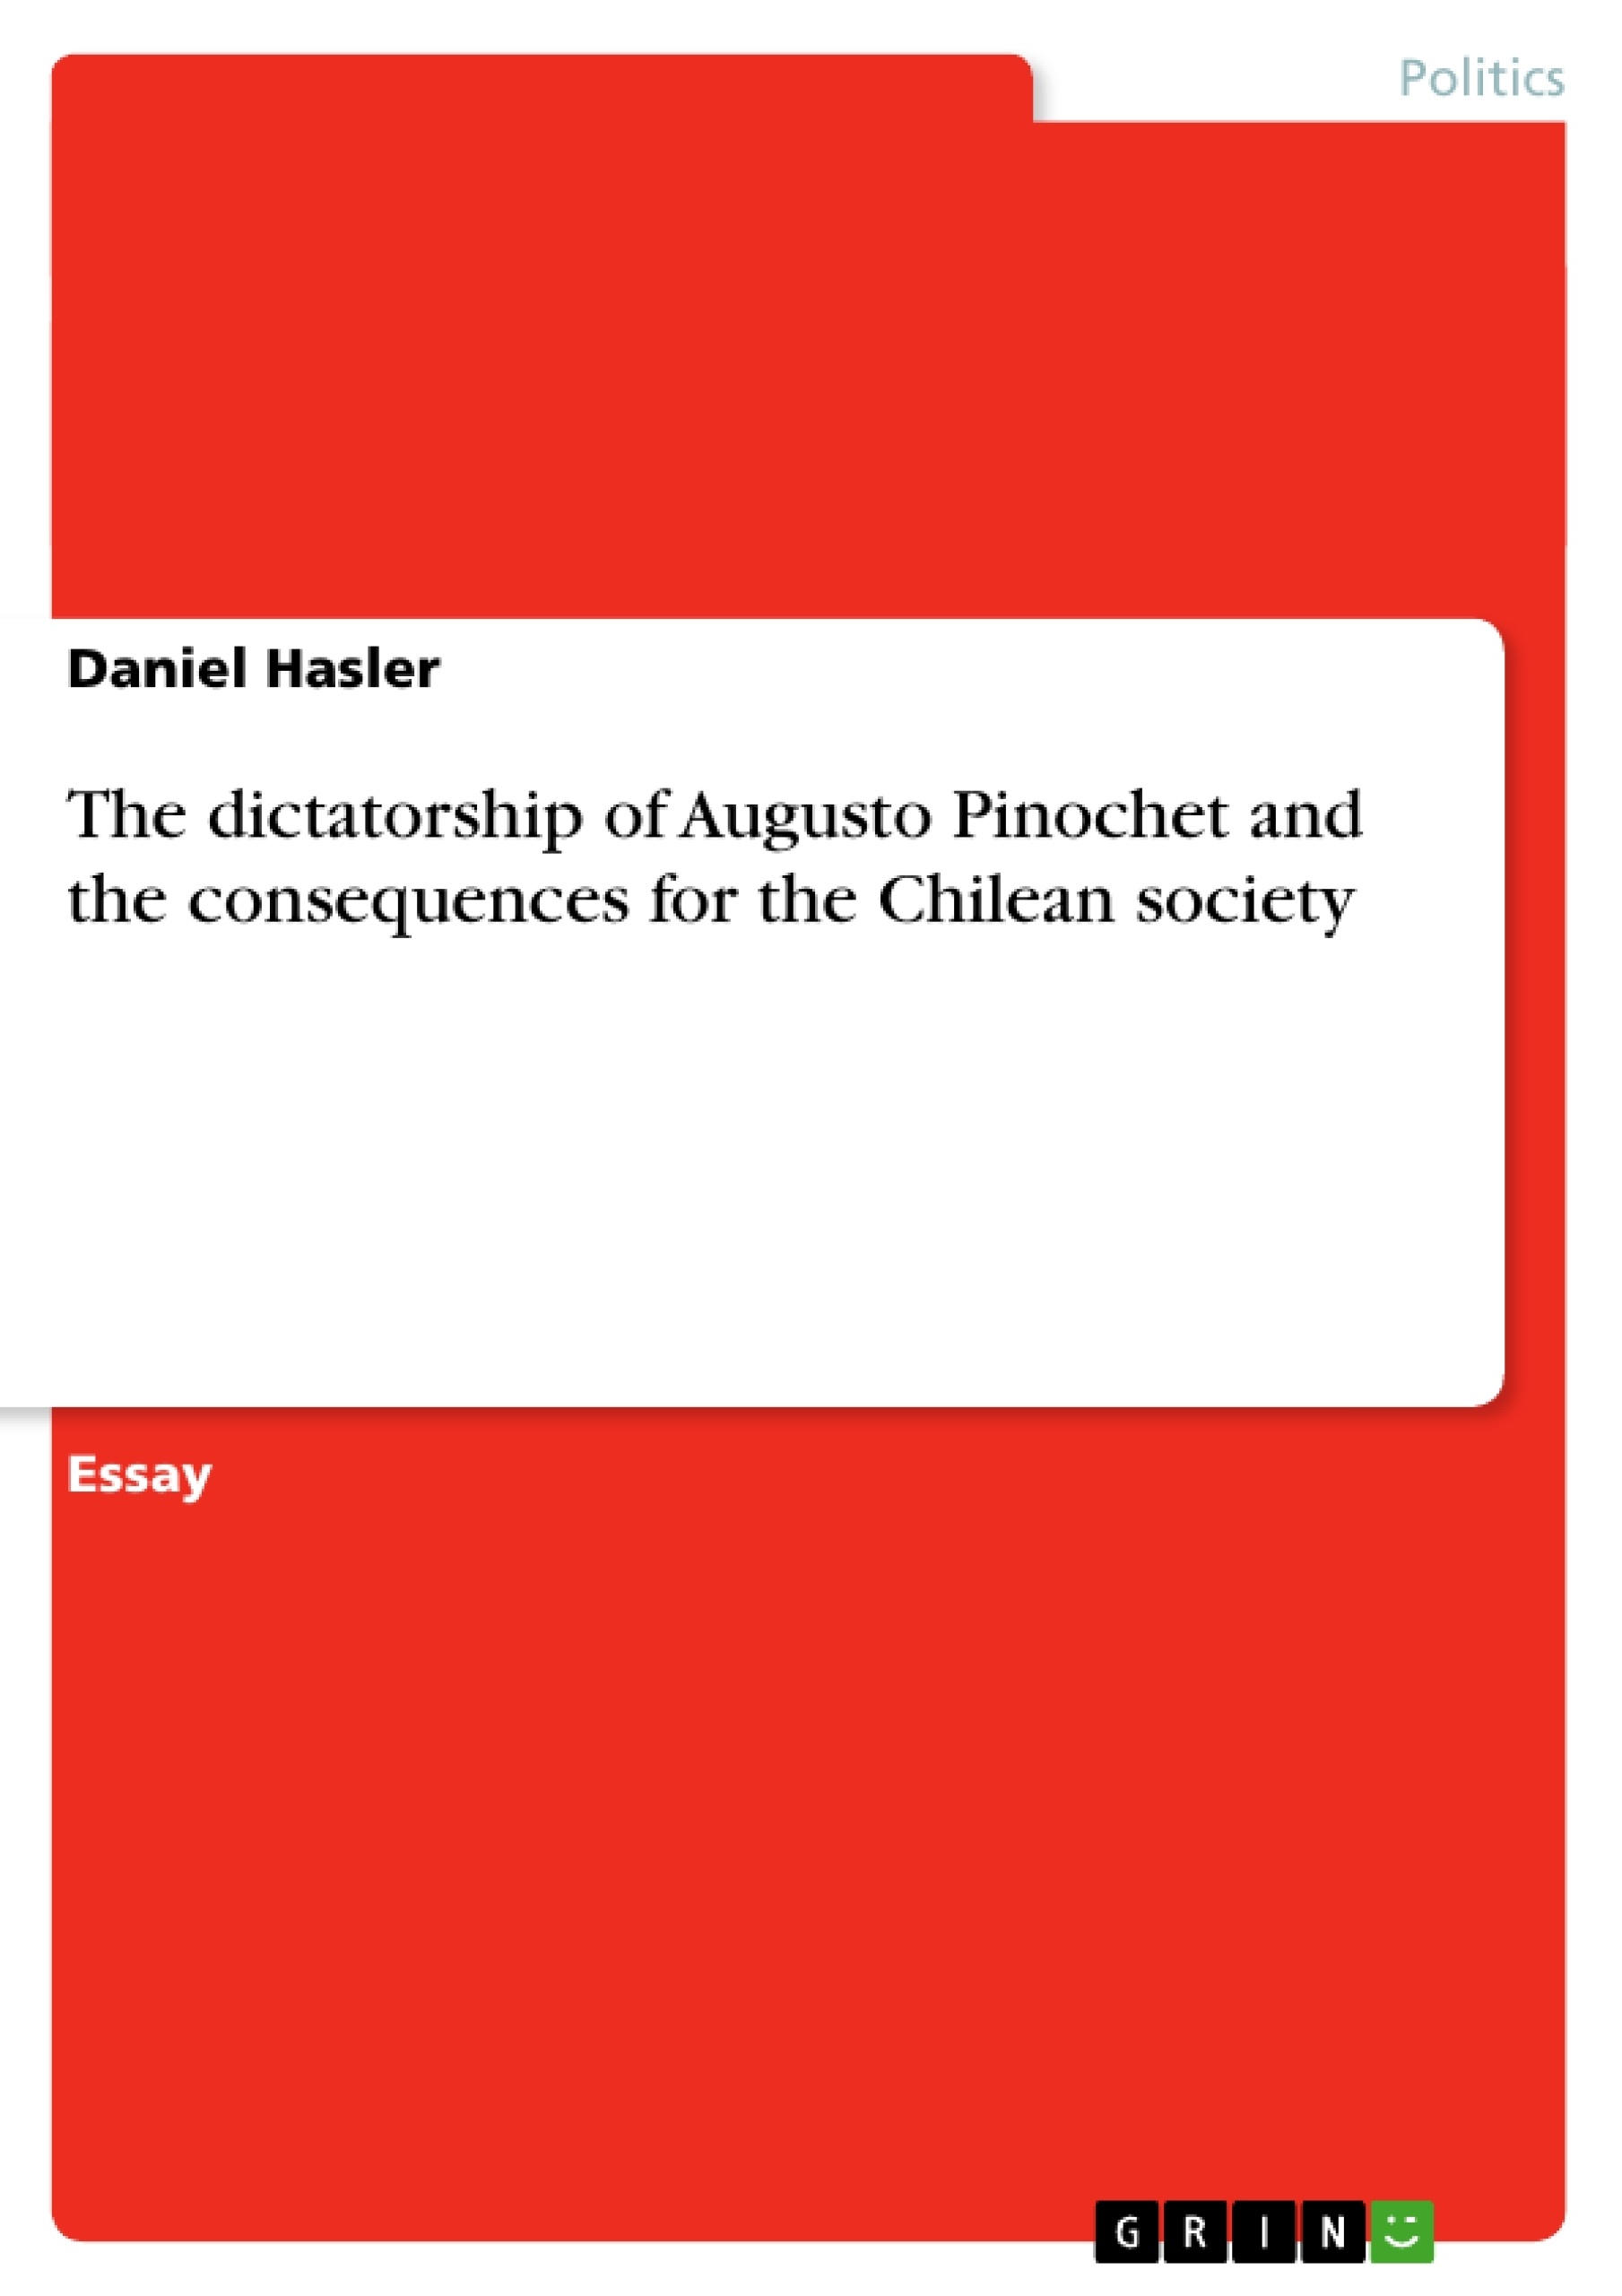 Titre: The dictatorship of Augusto Pinochet and the consequences for the Chilean society